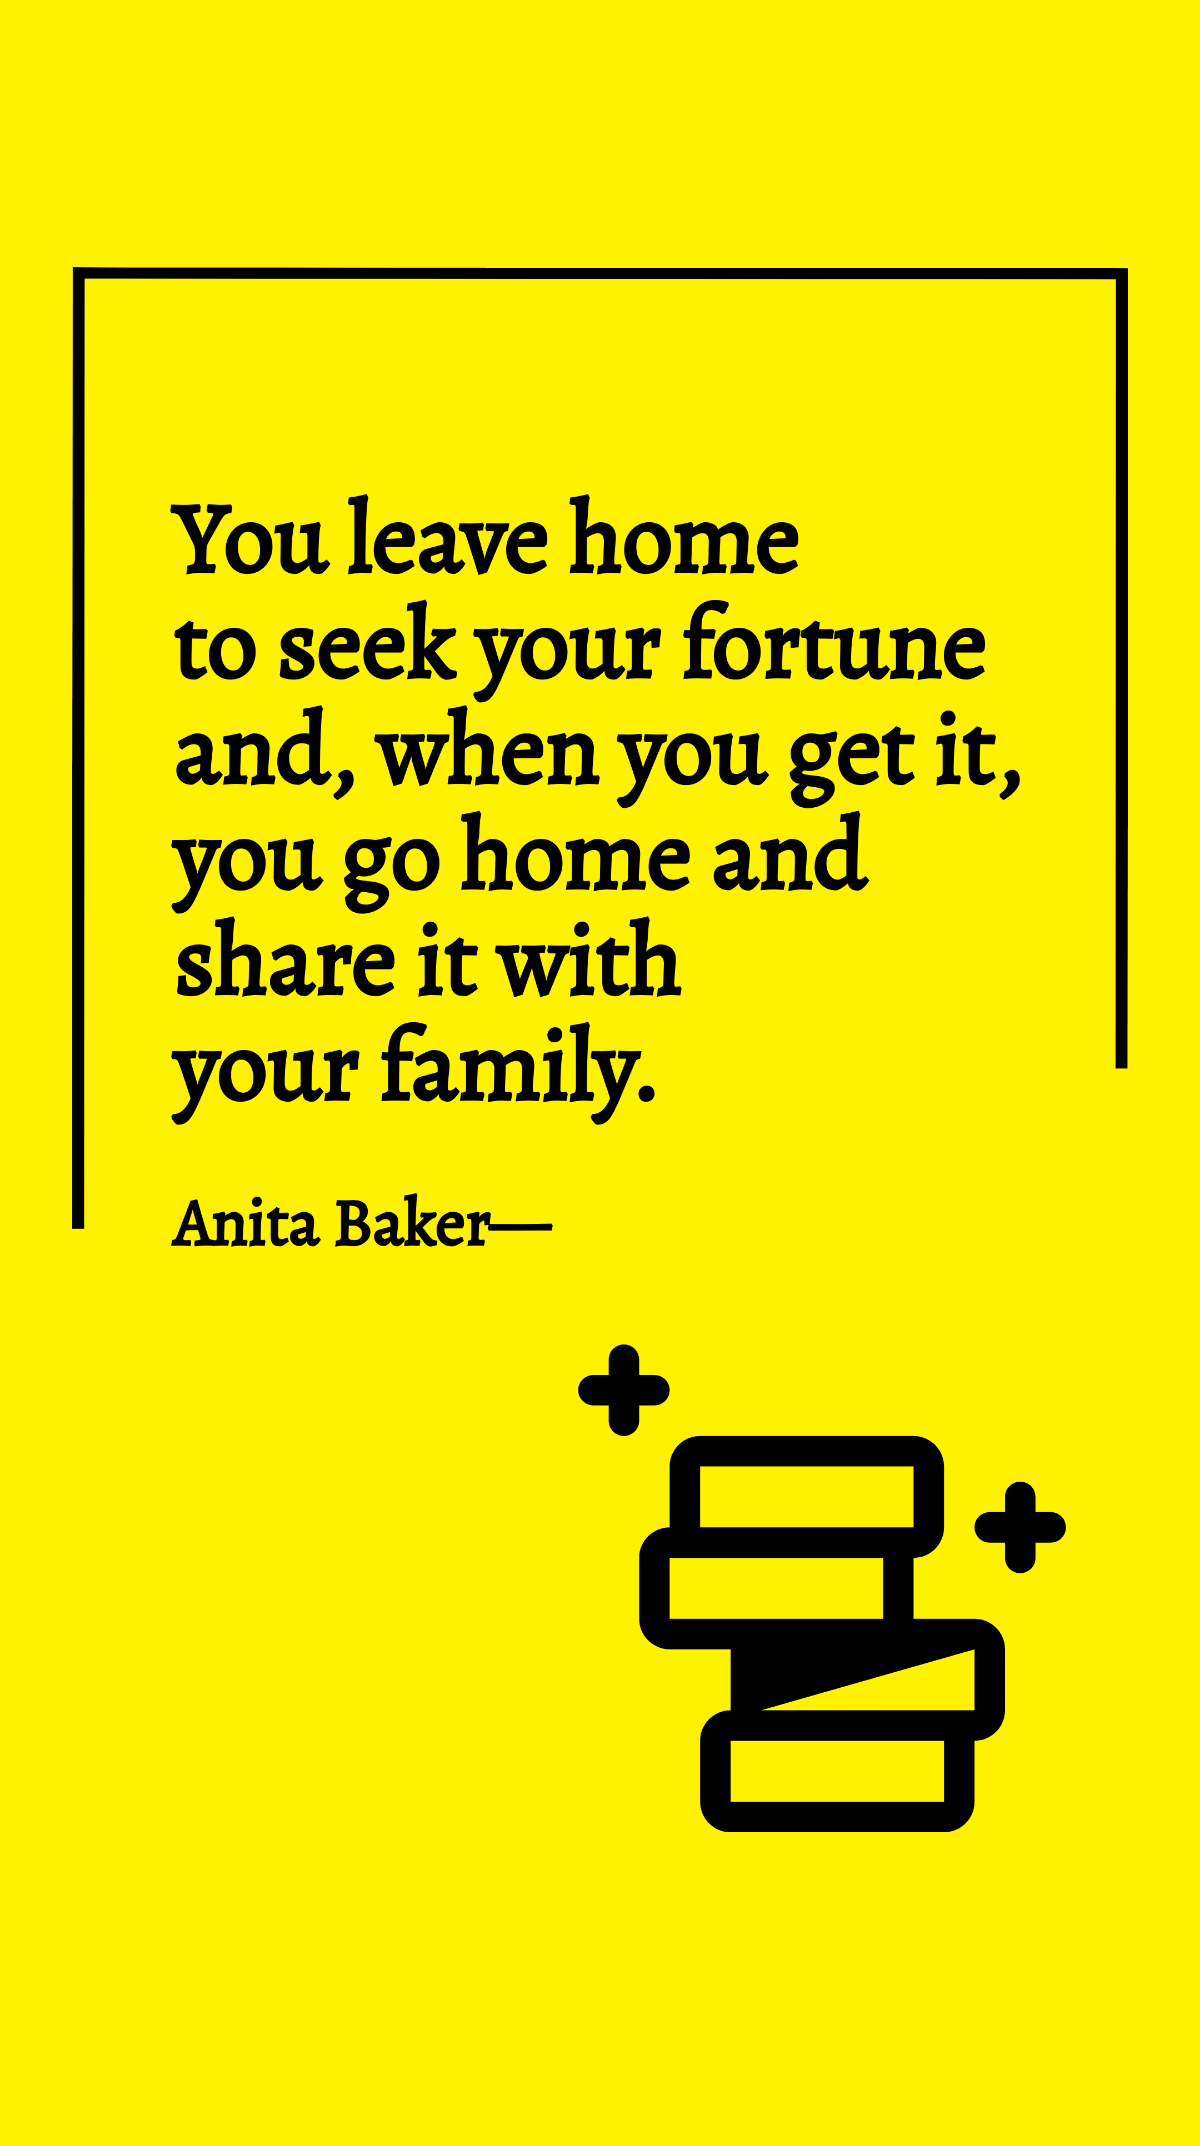 Anita Baker - You leave home to seek your fortune and, when you get it, you go home and share it with your family. Template